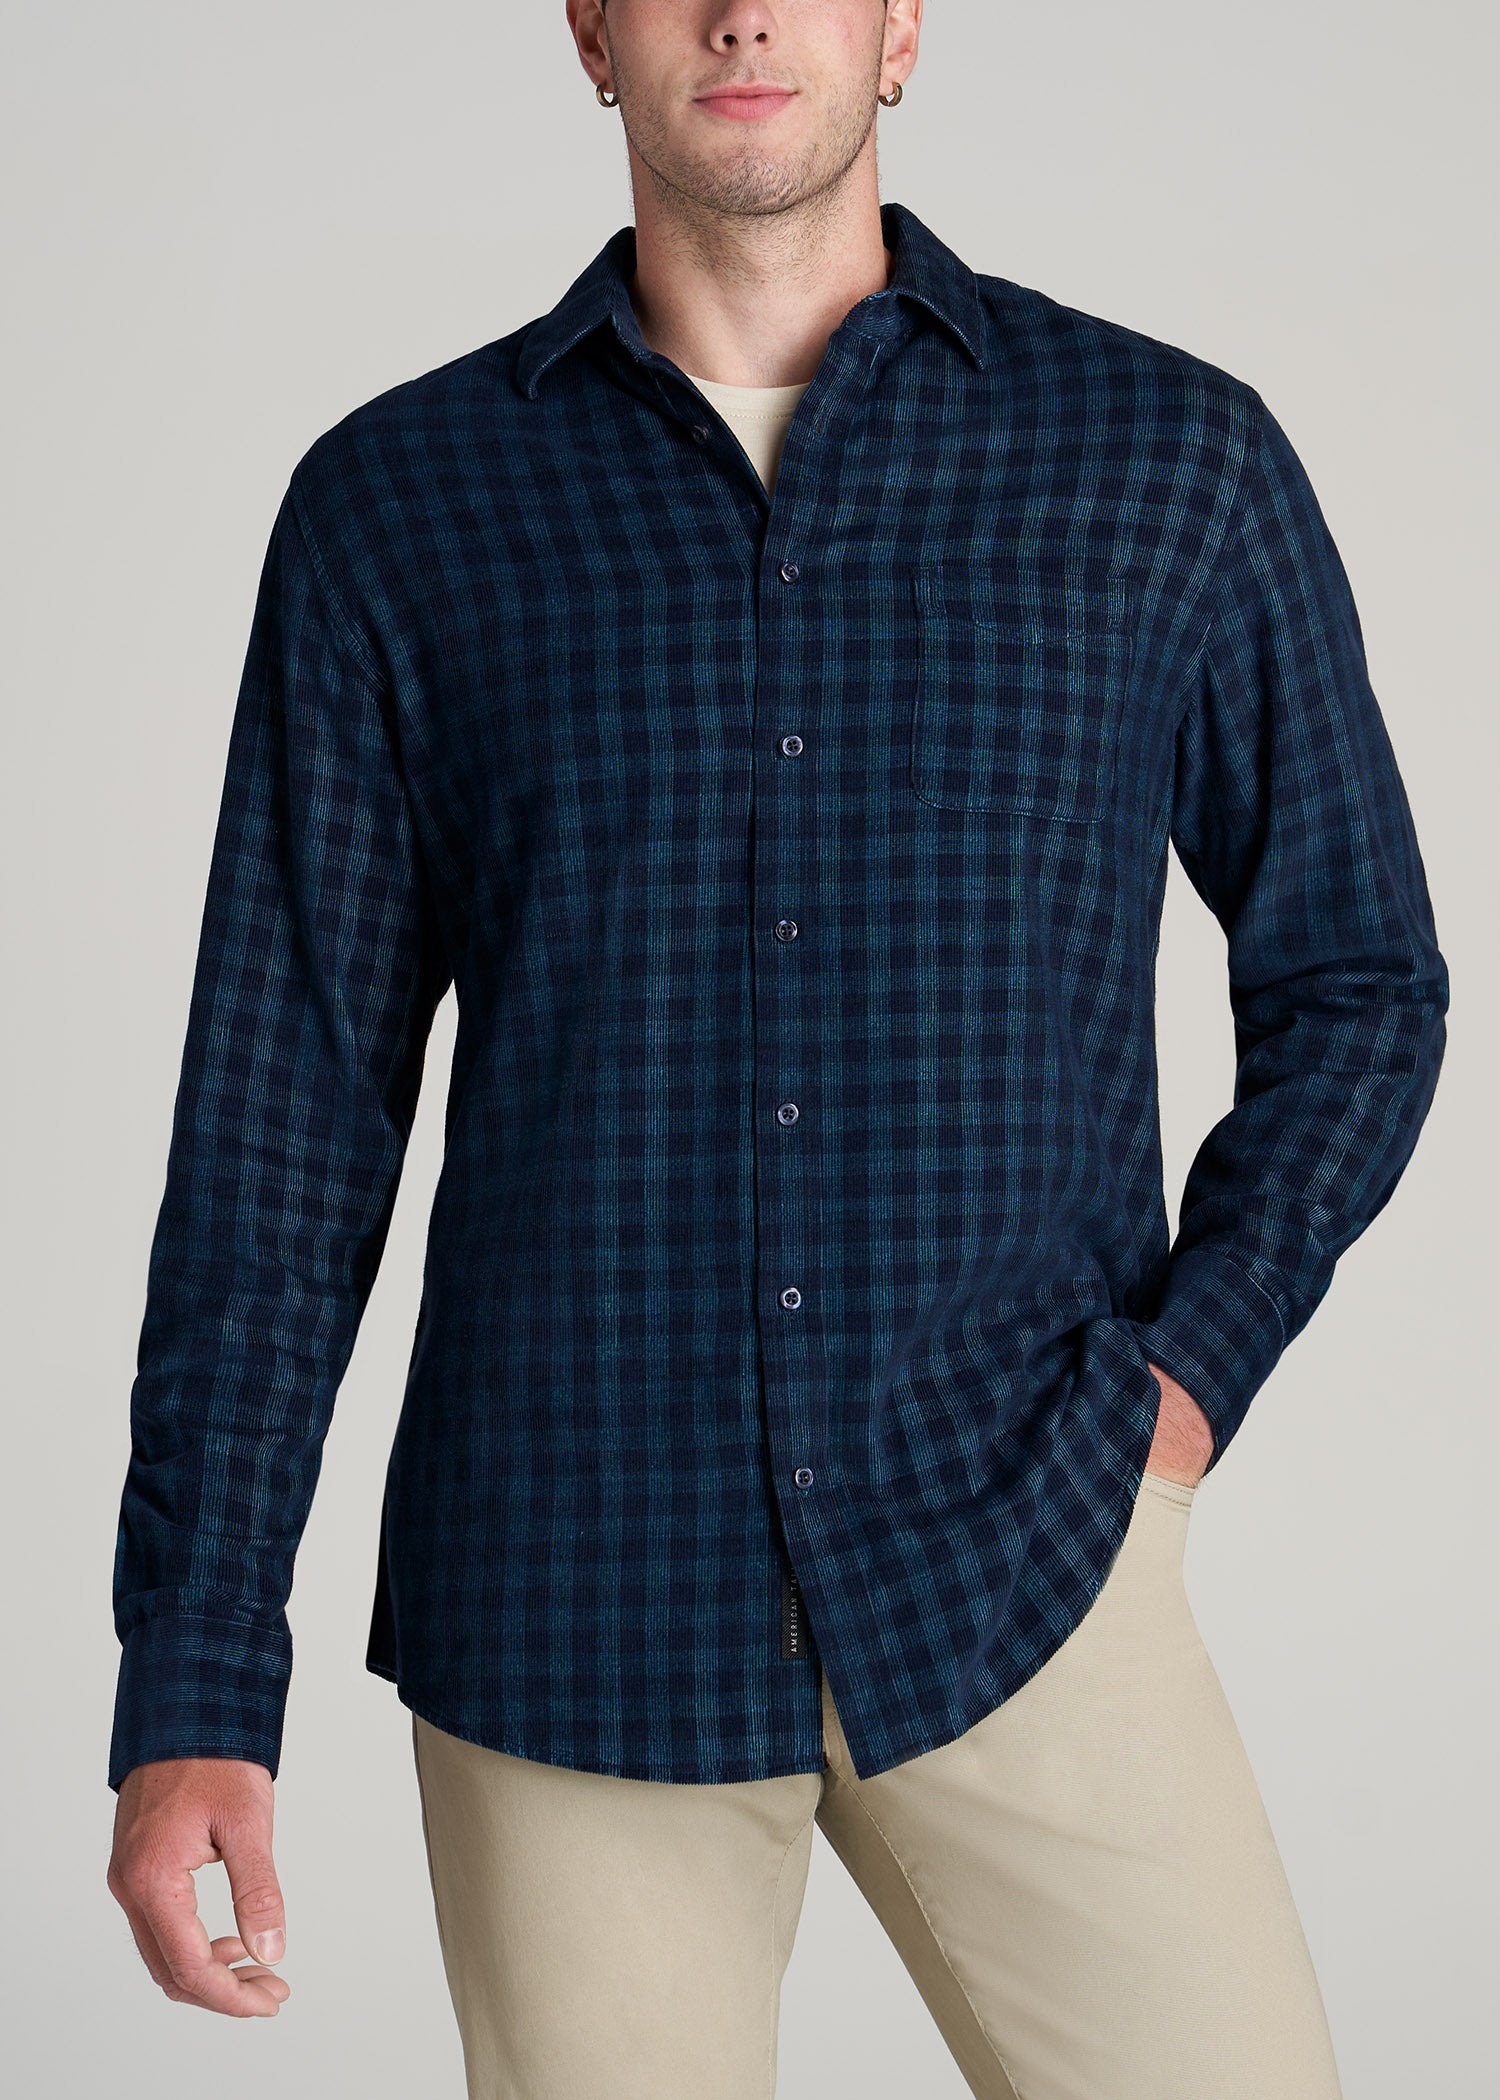       American-Tall-Men-Baby-Wale-Corduroy-Button-Shirt-Teal-Navy-Plaid-front